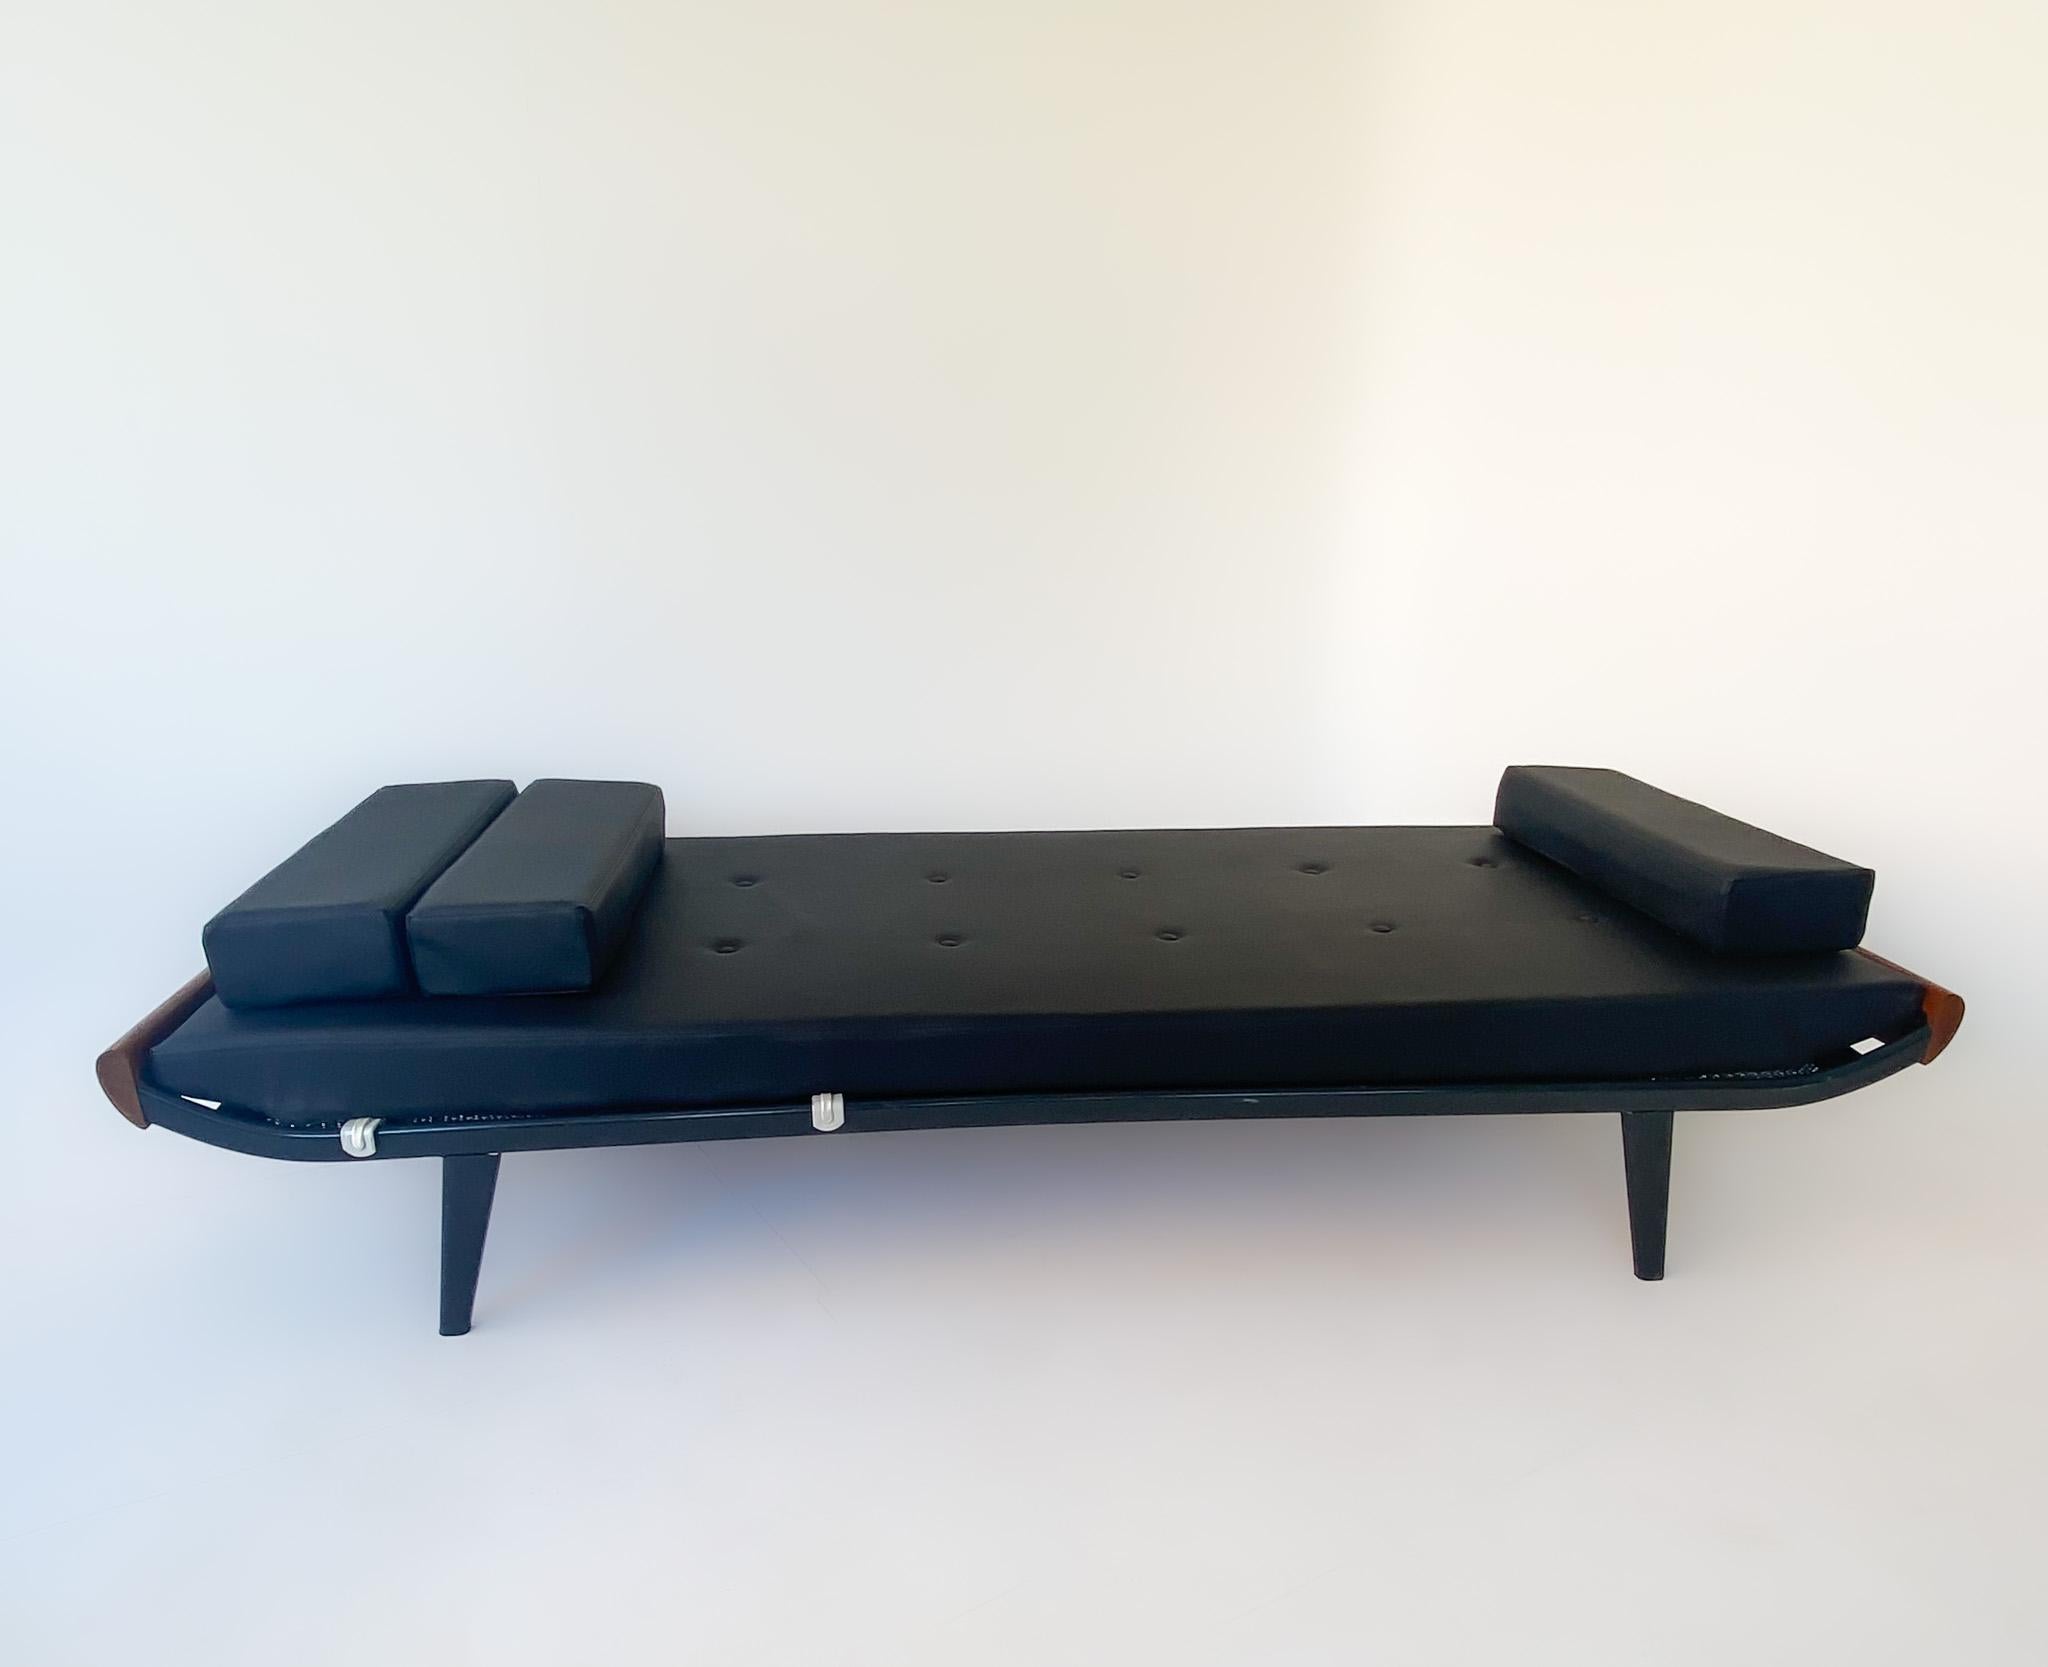 Mid-Century Modern black daybed Cleopatra by Dick Cordemeijer for Auping, Netherlands 1960s

A very elegant daybed designed by Dick Cordemeijer and produced by Auping in the Netherlands in the 1960s. This daybed - named Cleopatra - has a black